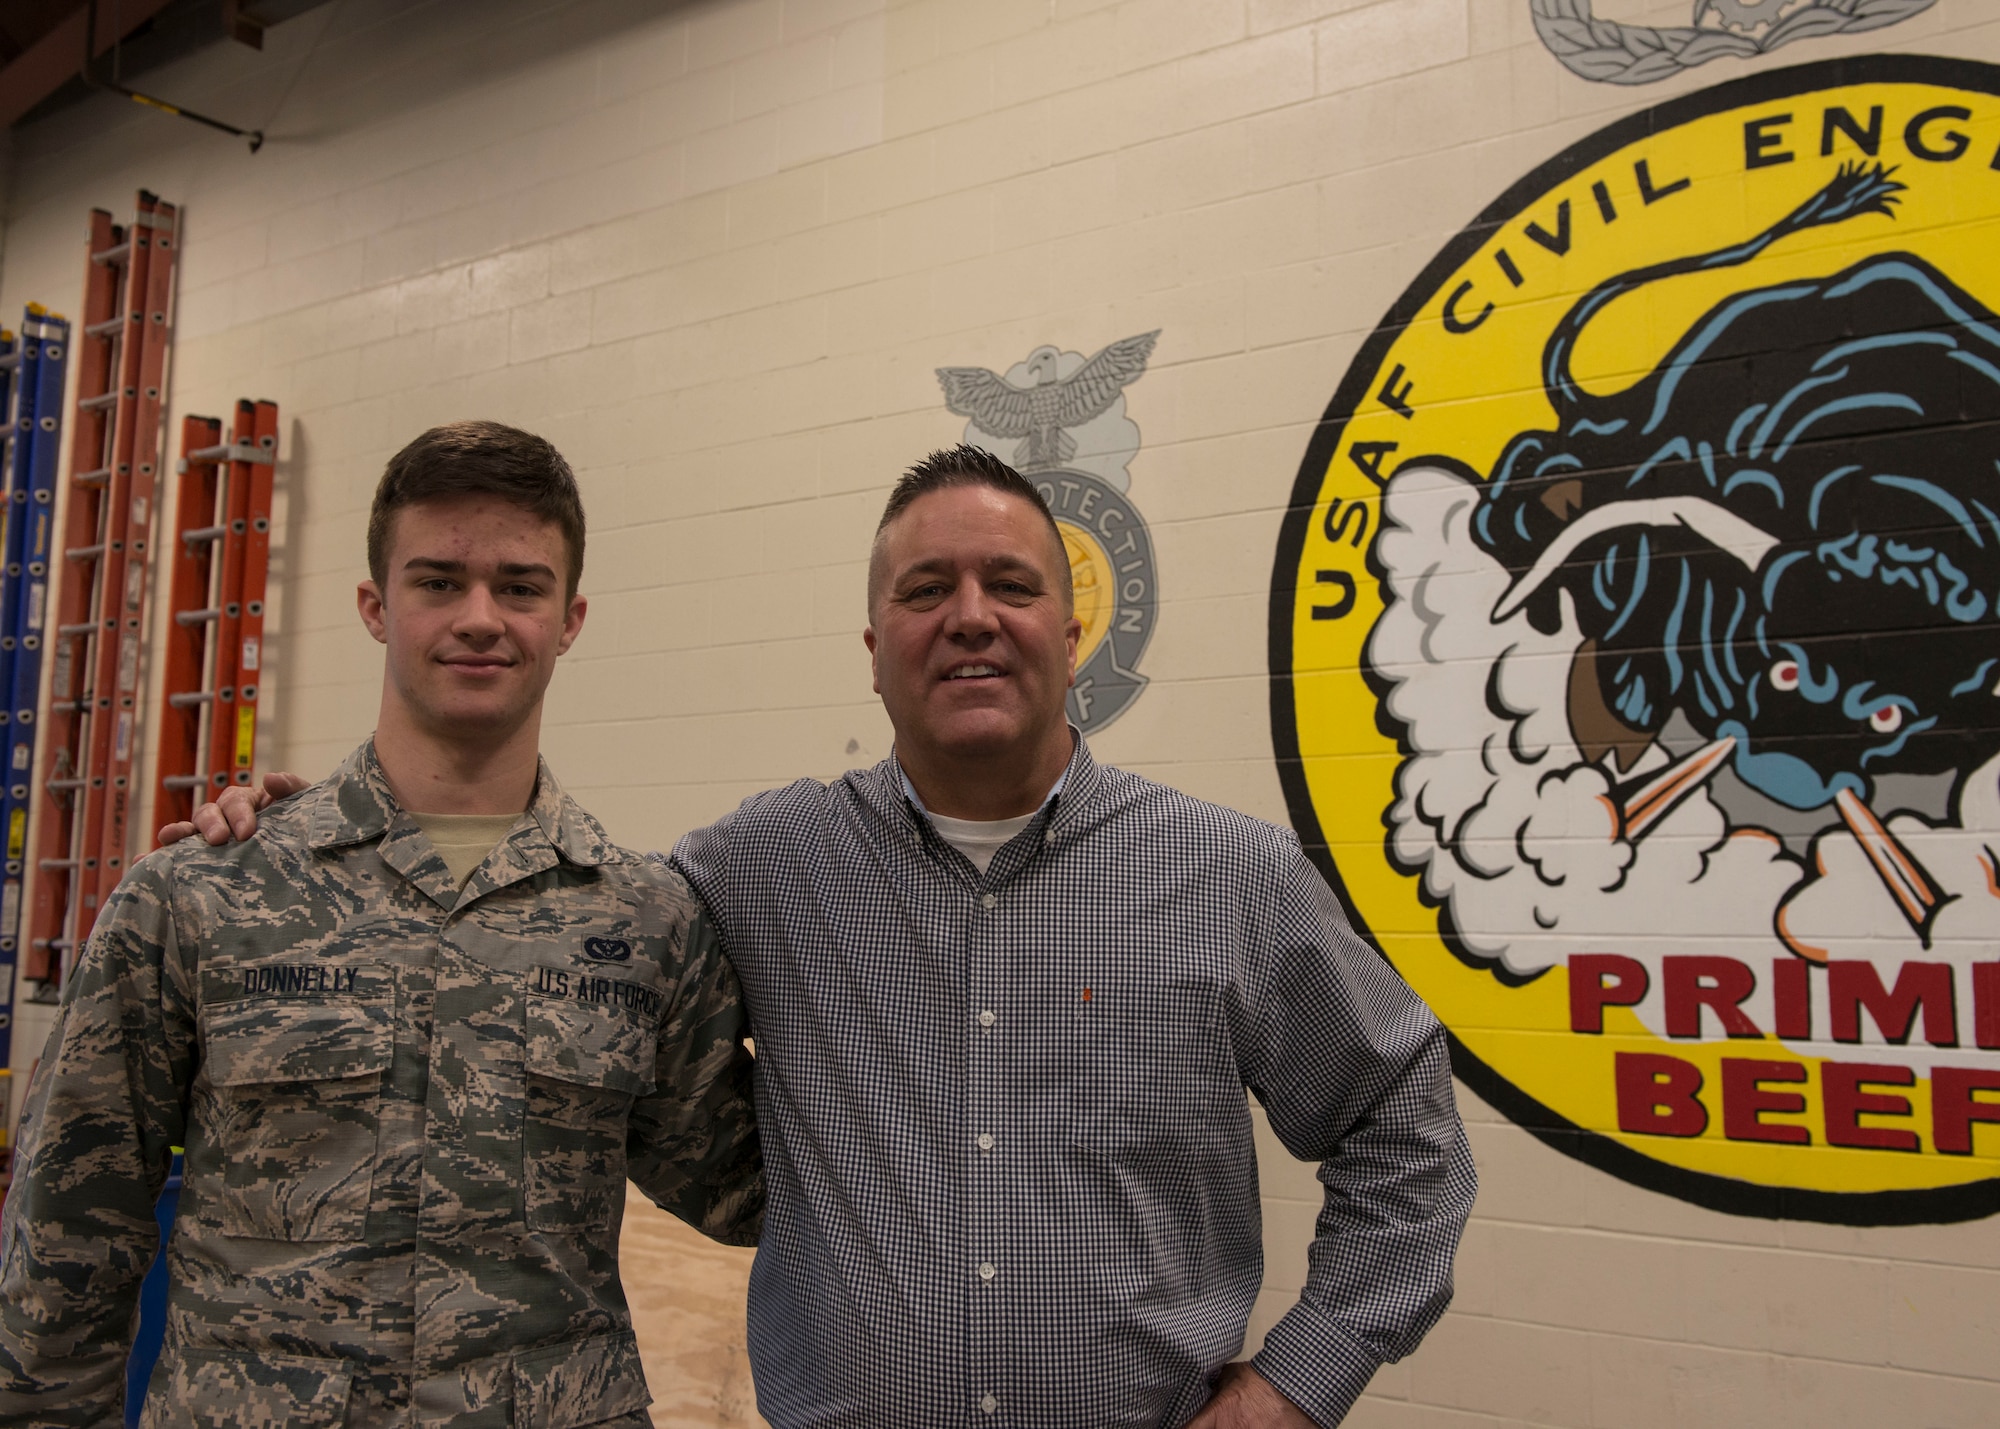 Airman 1st Class John Donnelly, III poses of the 103rd Civil Engineer Squadron poses for a photo with his father, Master Sgt. (Ret.) John Donnelly, II, February 10, 2019 at Bradley Air National Guard Base, East Granby, Conn. The senior Donnelly, an OSHA Federal Compliance Officer, coordinated with members of 103rd CES to conduct OSHA training for 40 members of the squadron. (U.S. Air National Guard photo by Tech. Sgt. Tamara R. Dabney)